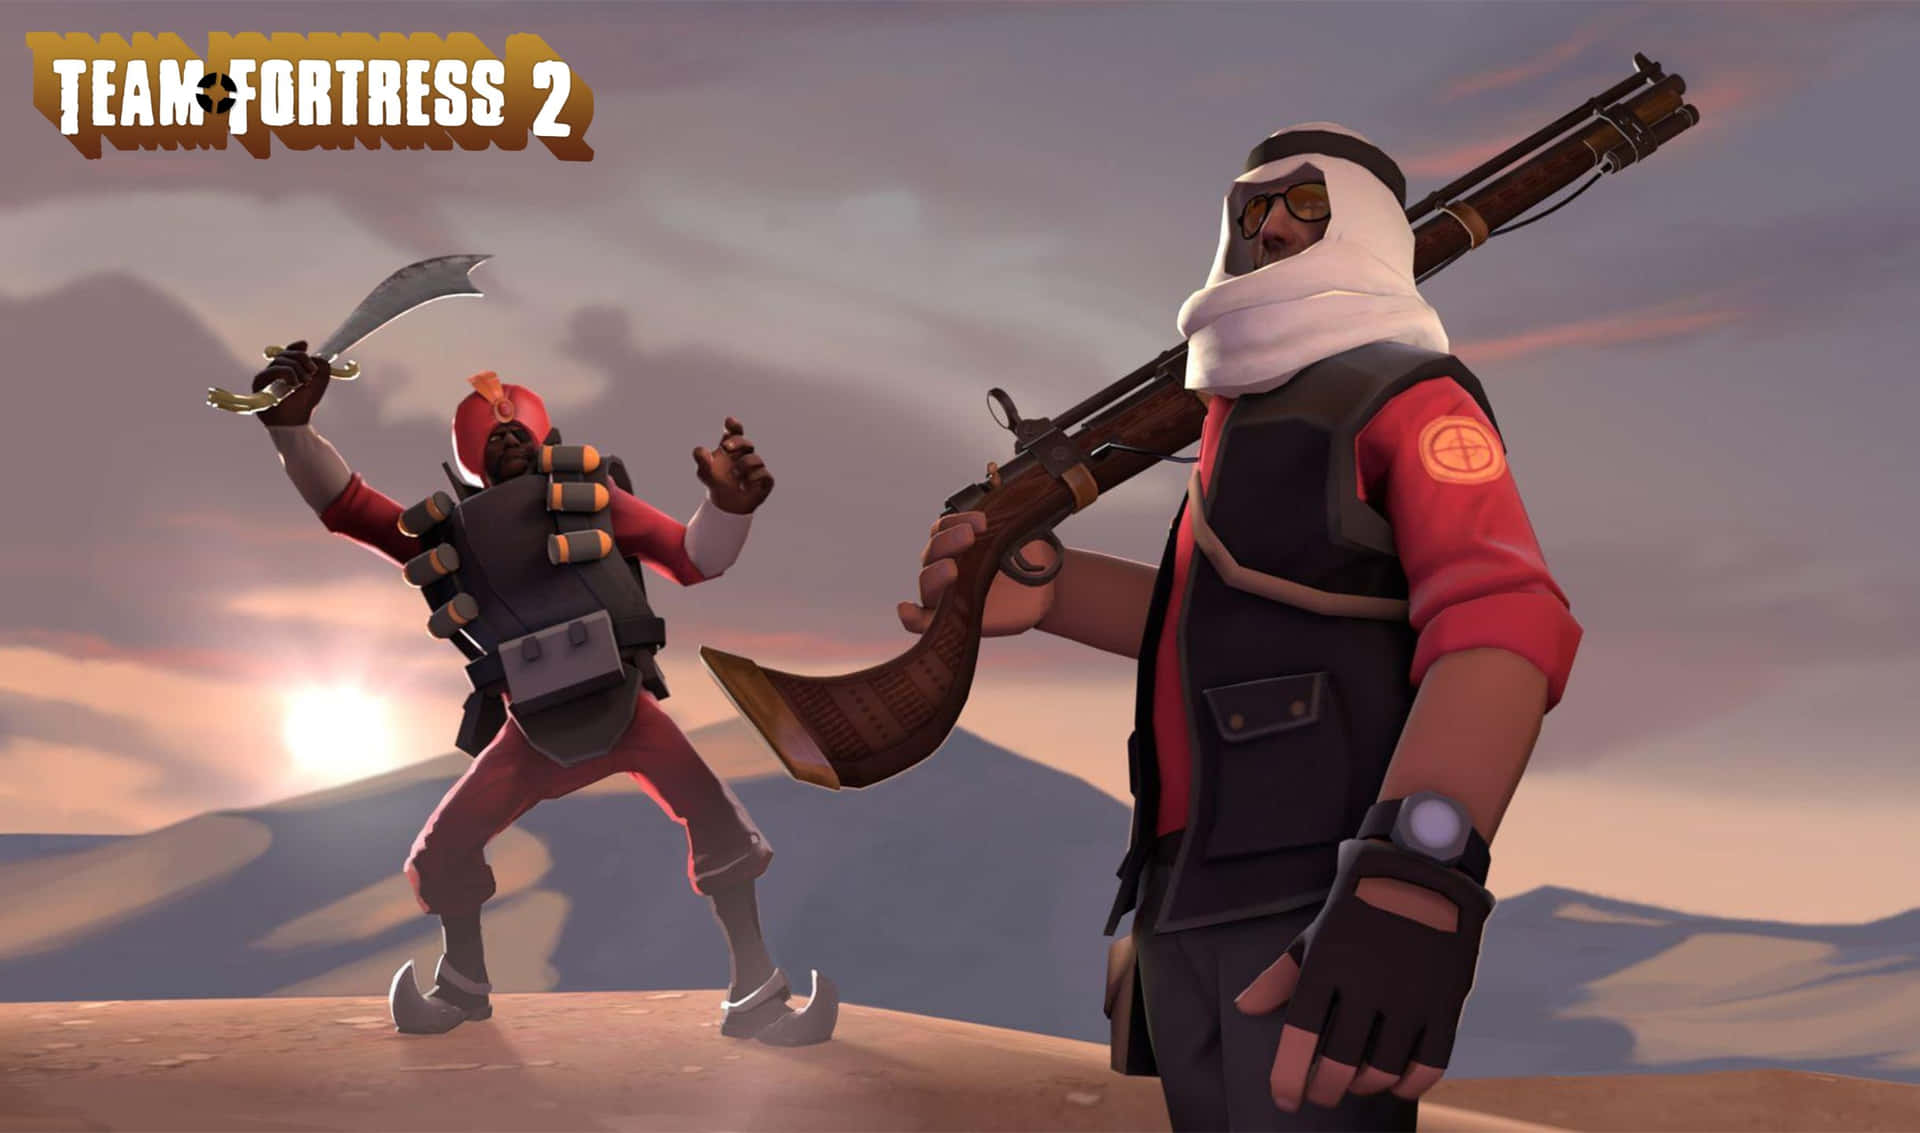 gamers playing Team Fortress 2 on a vibrant, 2440x1440 resolution